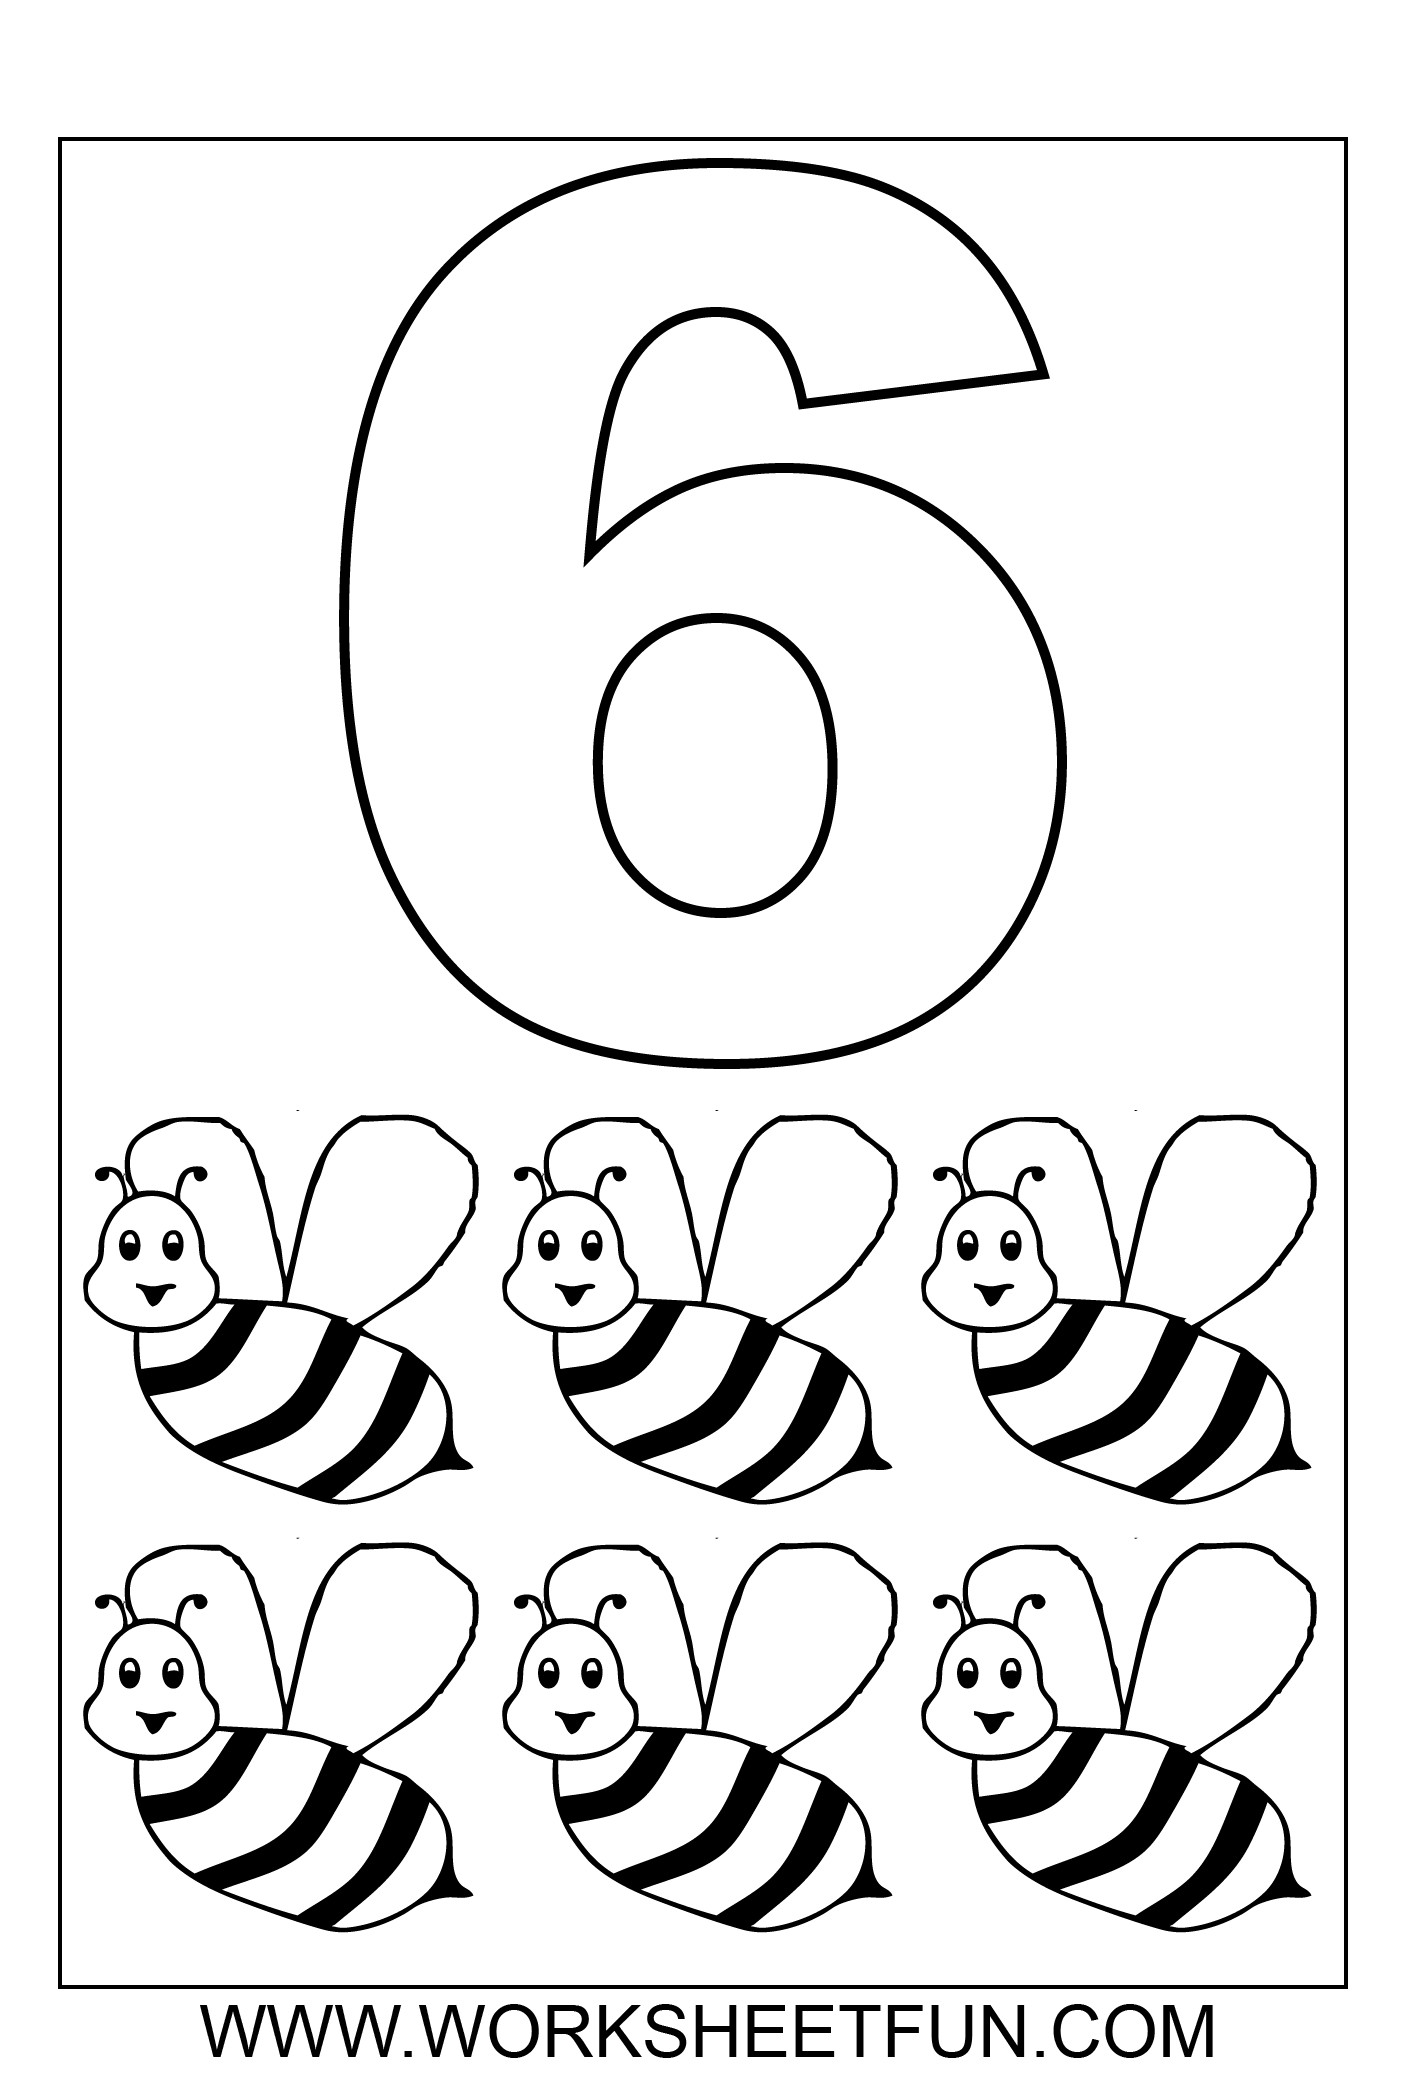 Numbers Coloring Pages
 Number Coloring Pages 1 – 10 Worksheets FREE Printable